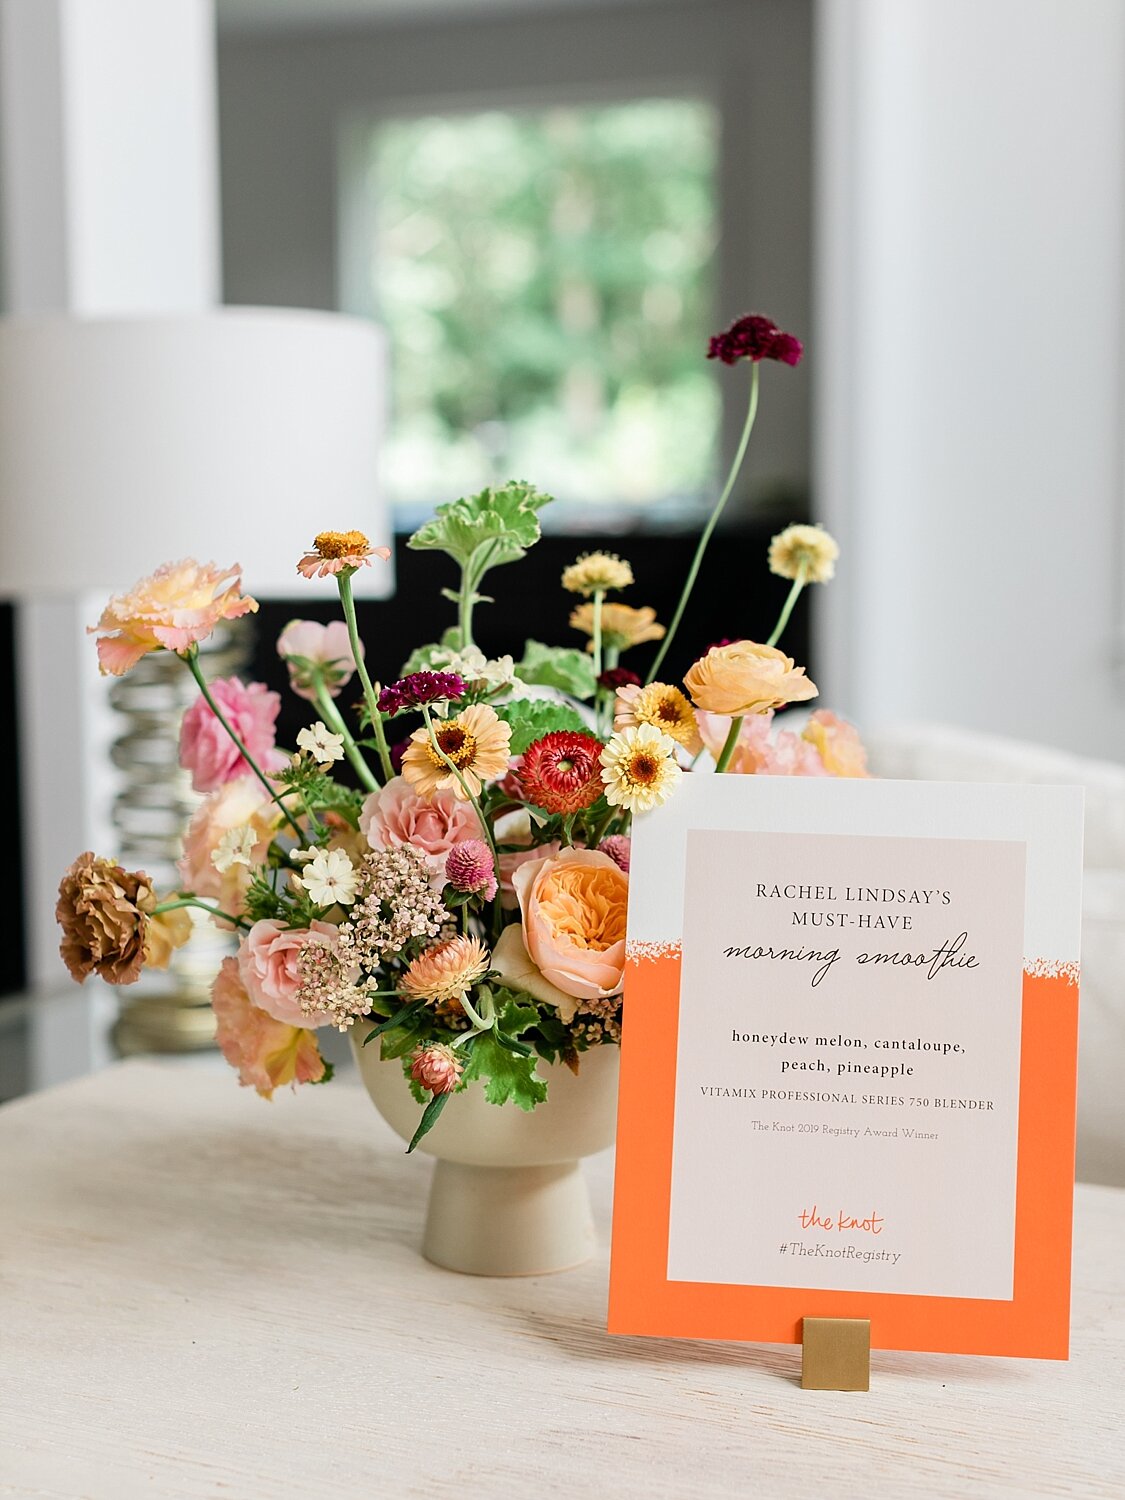 The Knot event with Rachel Lindsay welcome signs